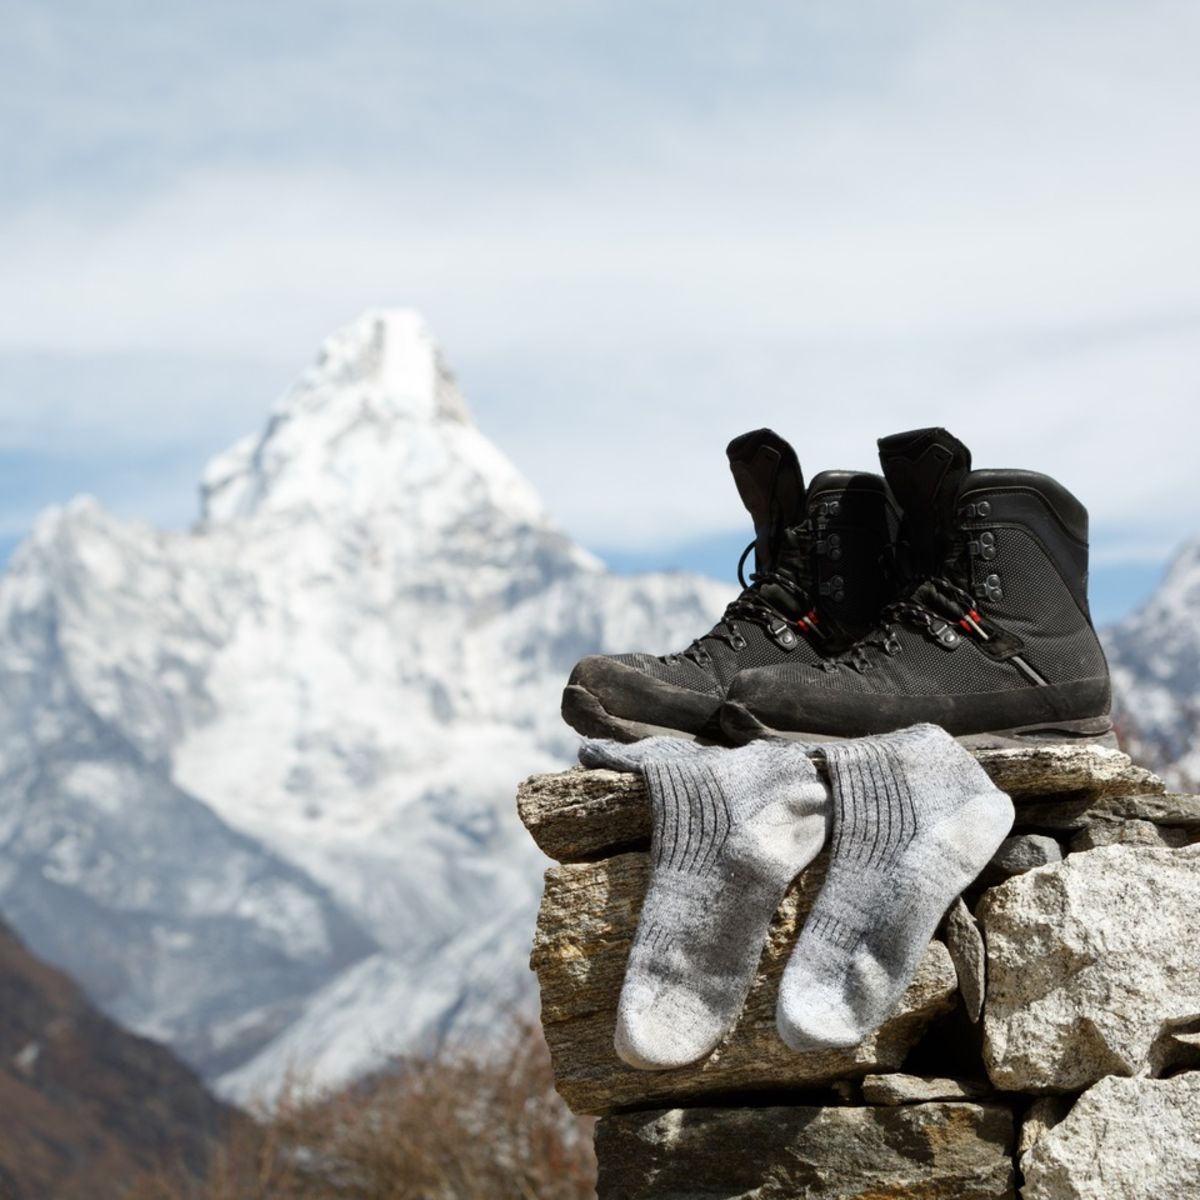 Hiking boots and sock drying on EBC trek in Nepal with Ama Dablam in background